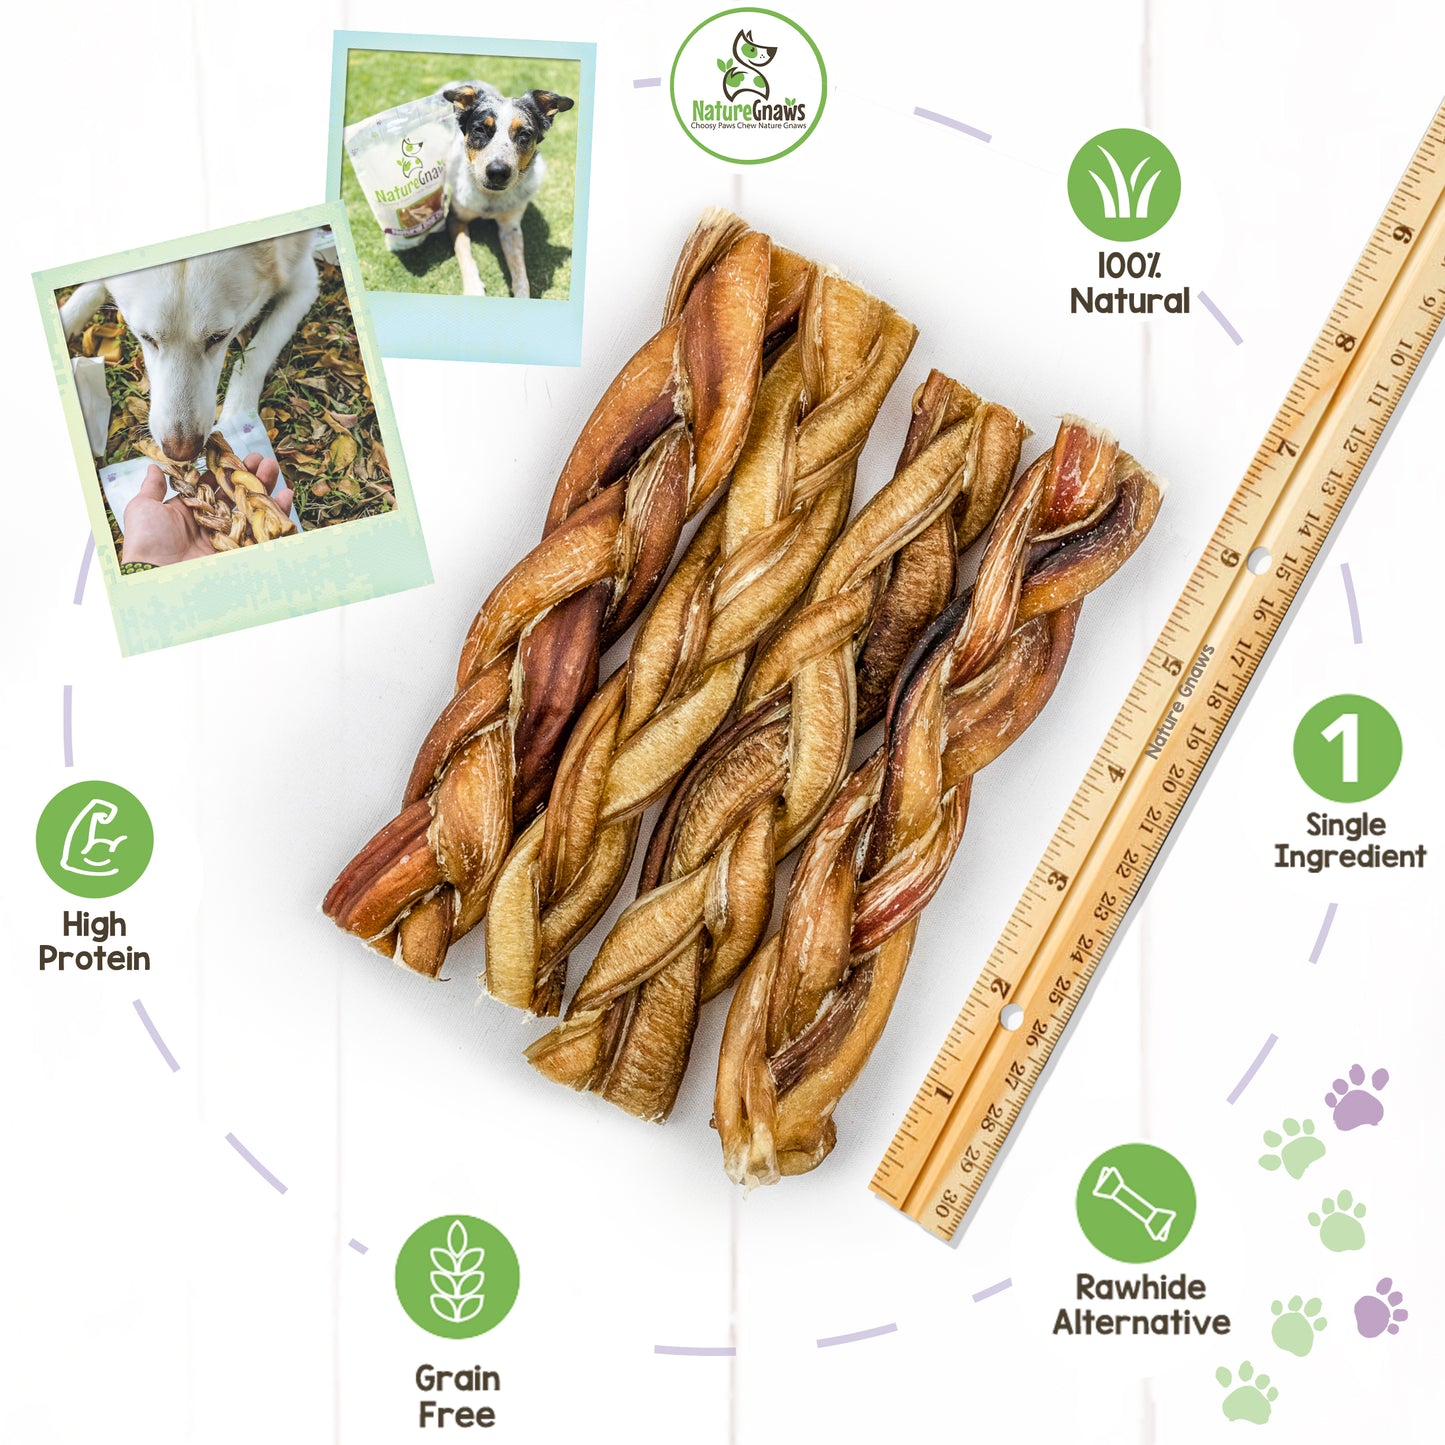 a pile of 4 braided bully sticks next to ruler for perspective, green benefits icons and 2 polaroid images of dogs with braided bully sticks beside them in a Nature Gnaws bag